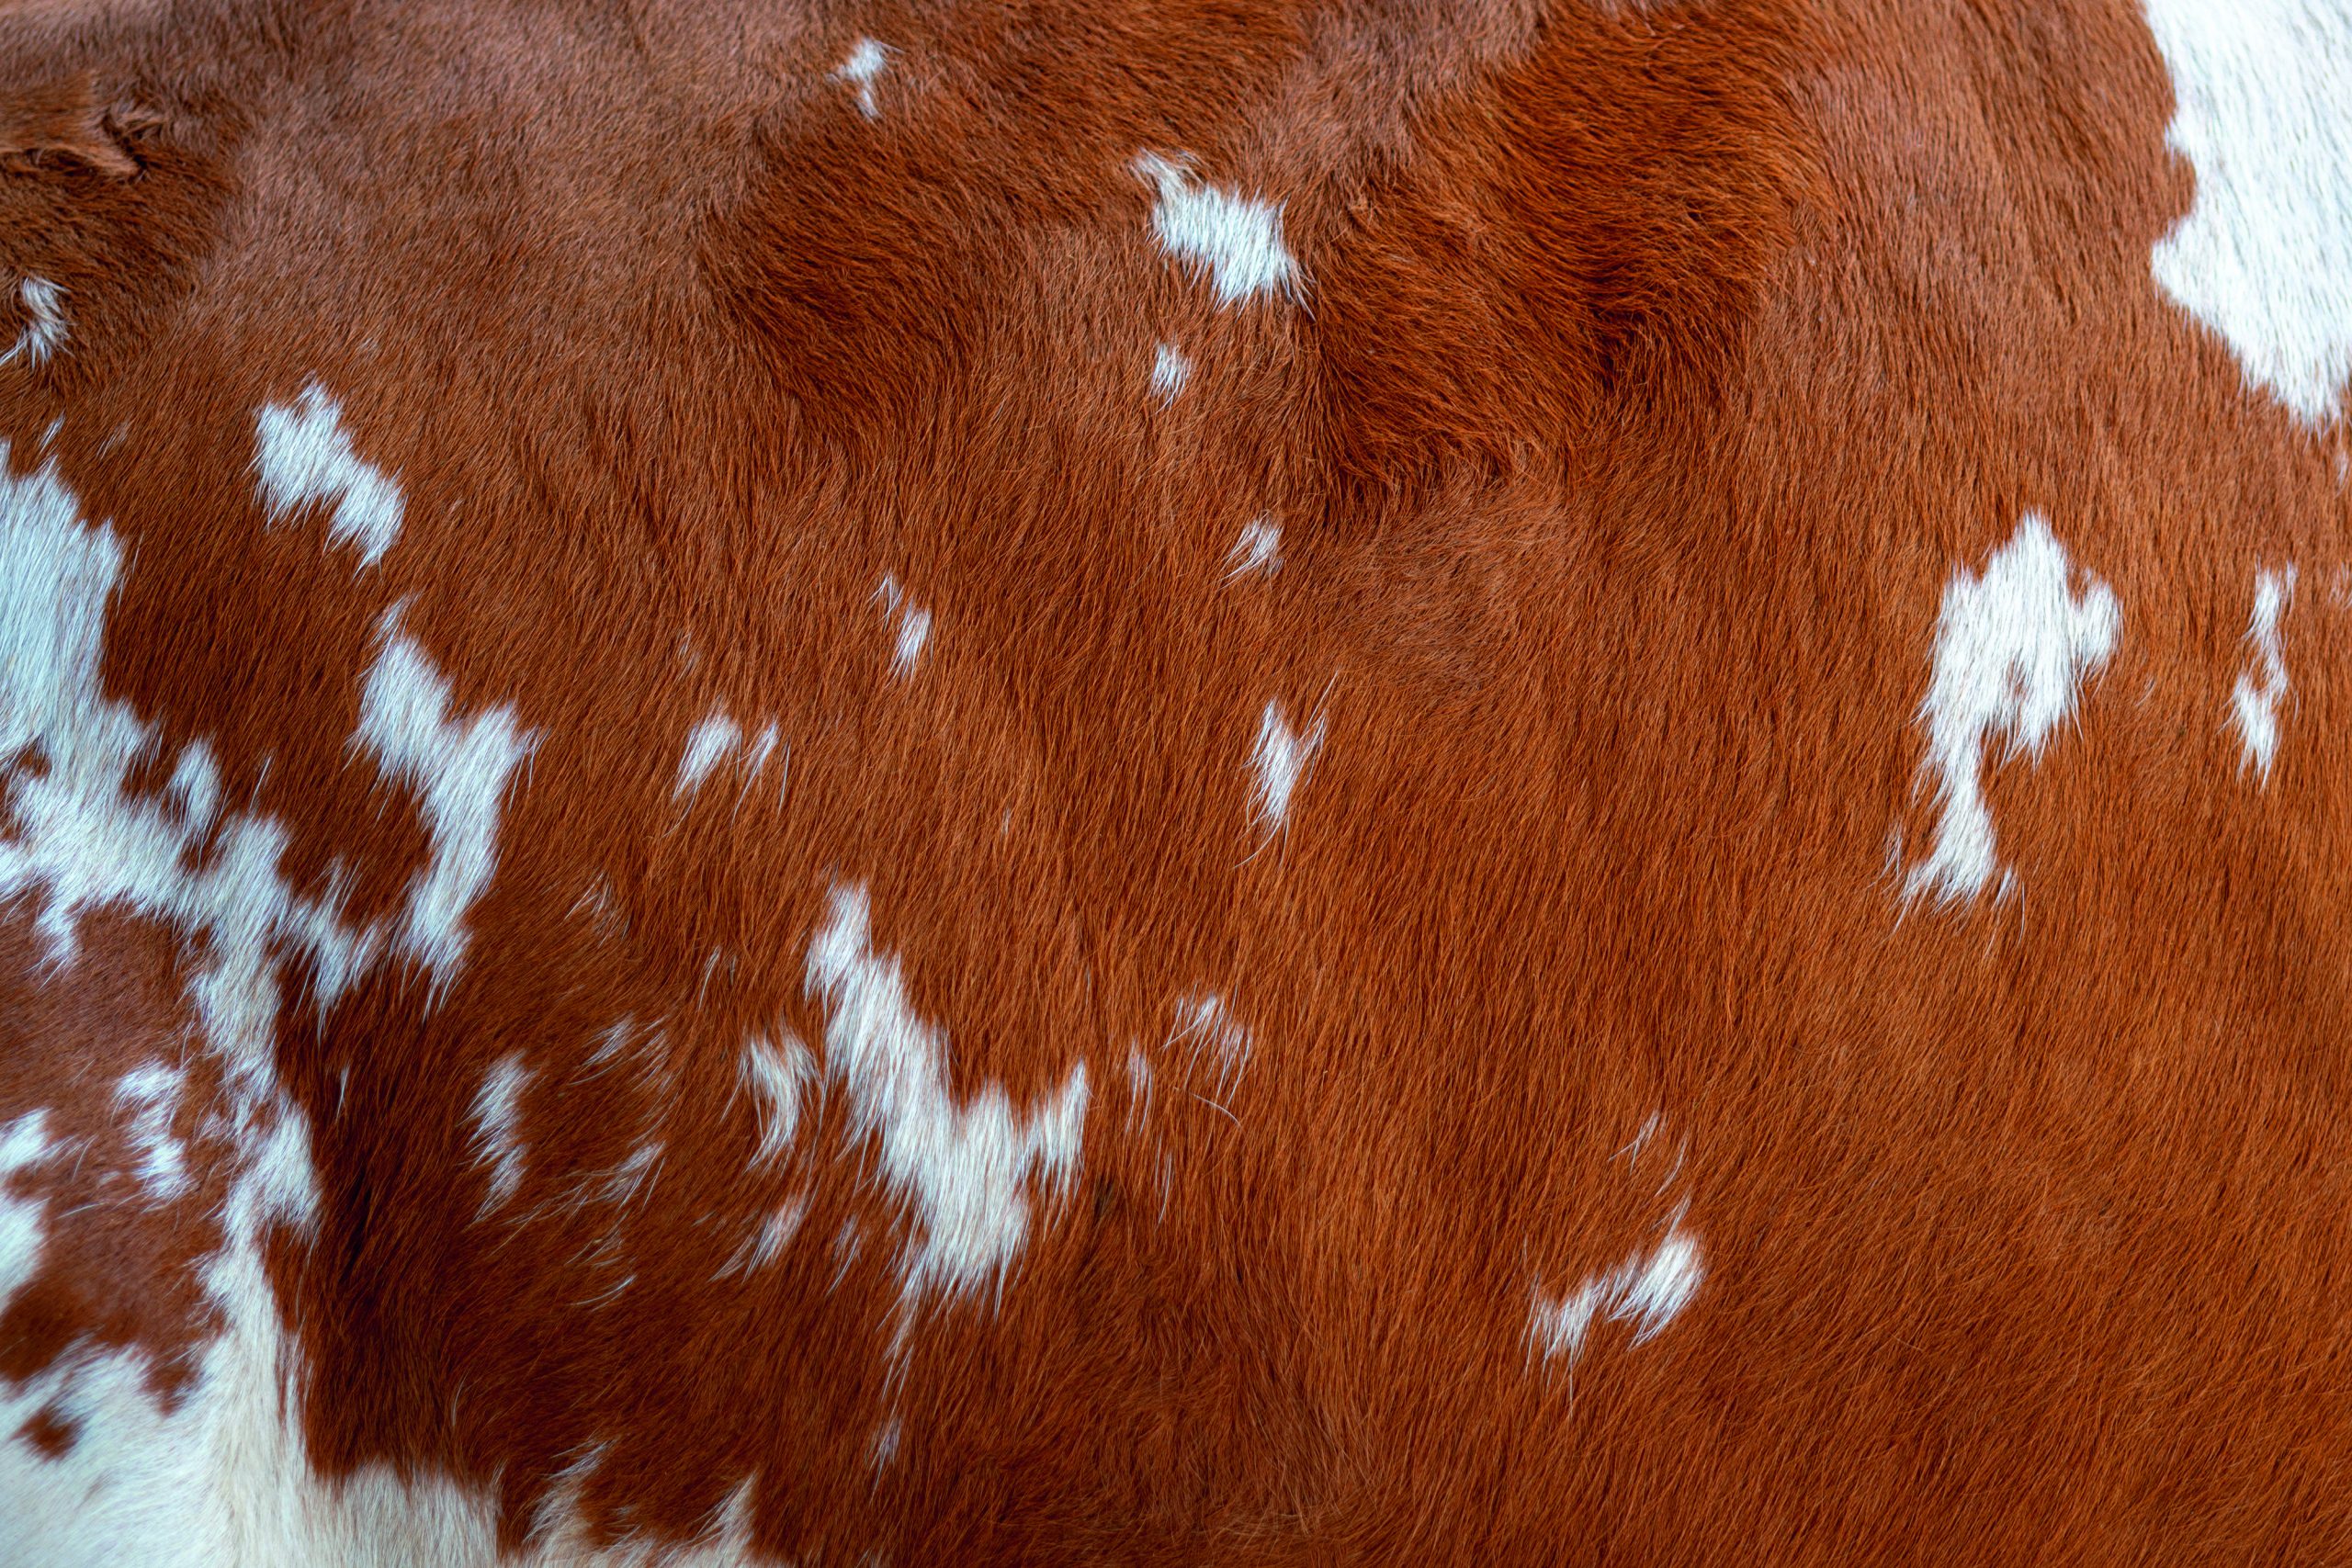 Texture of a brown Cow Coat. Fragment. White and brown spots.